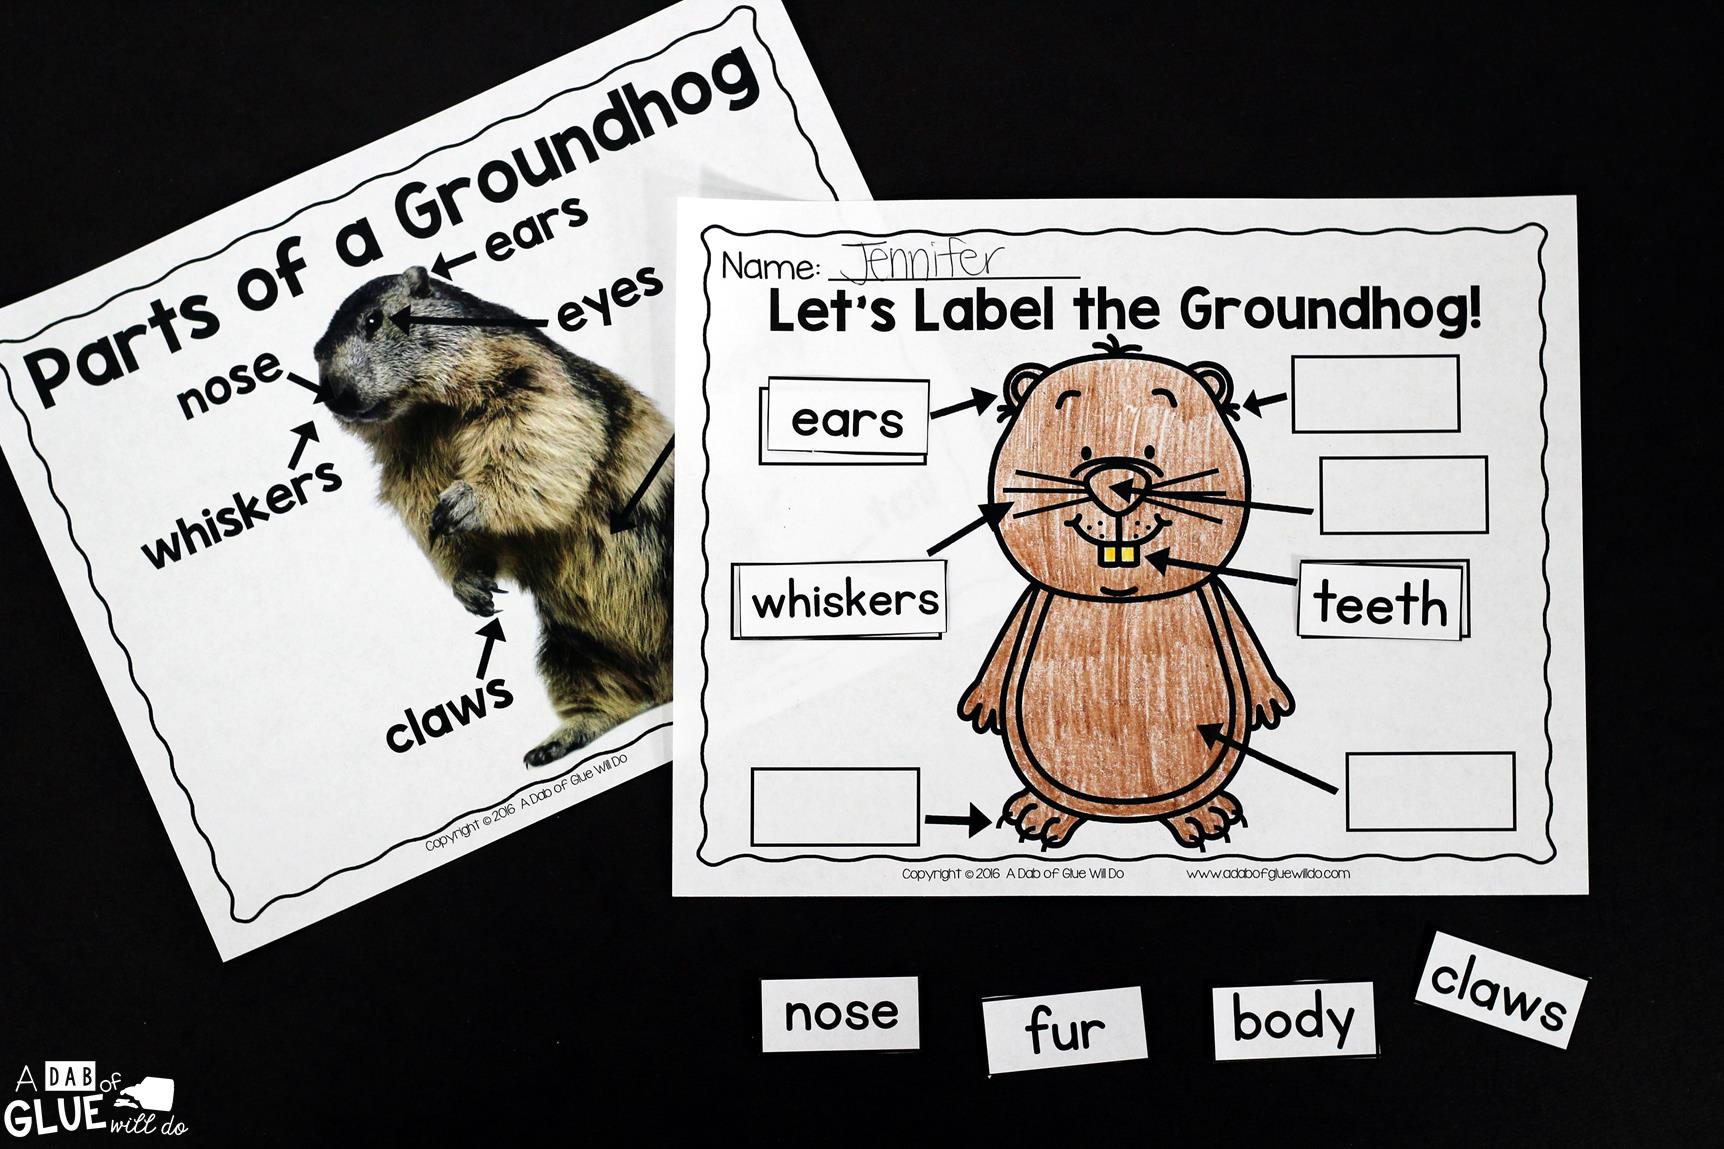 Animal Study: Don't miss our Groundhog Facts Animal Study full of great information, activities, and learning projects ideal to help your students learn!